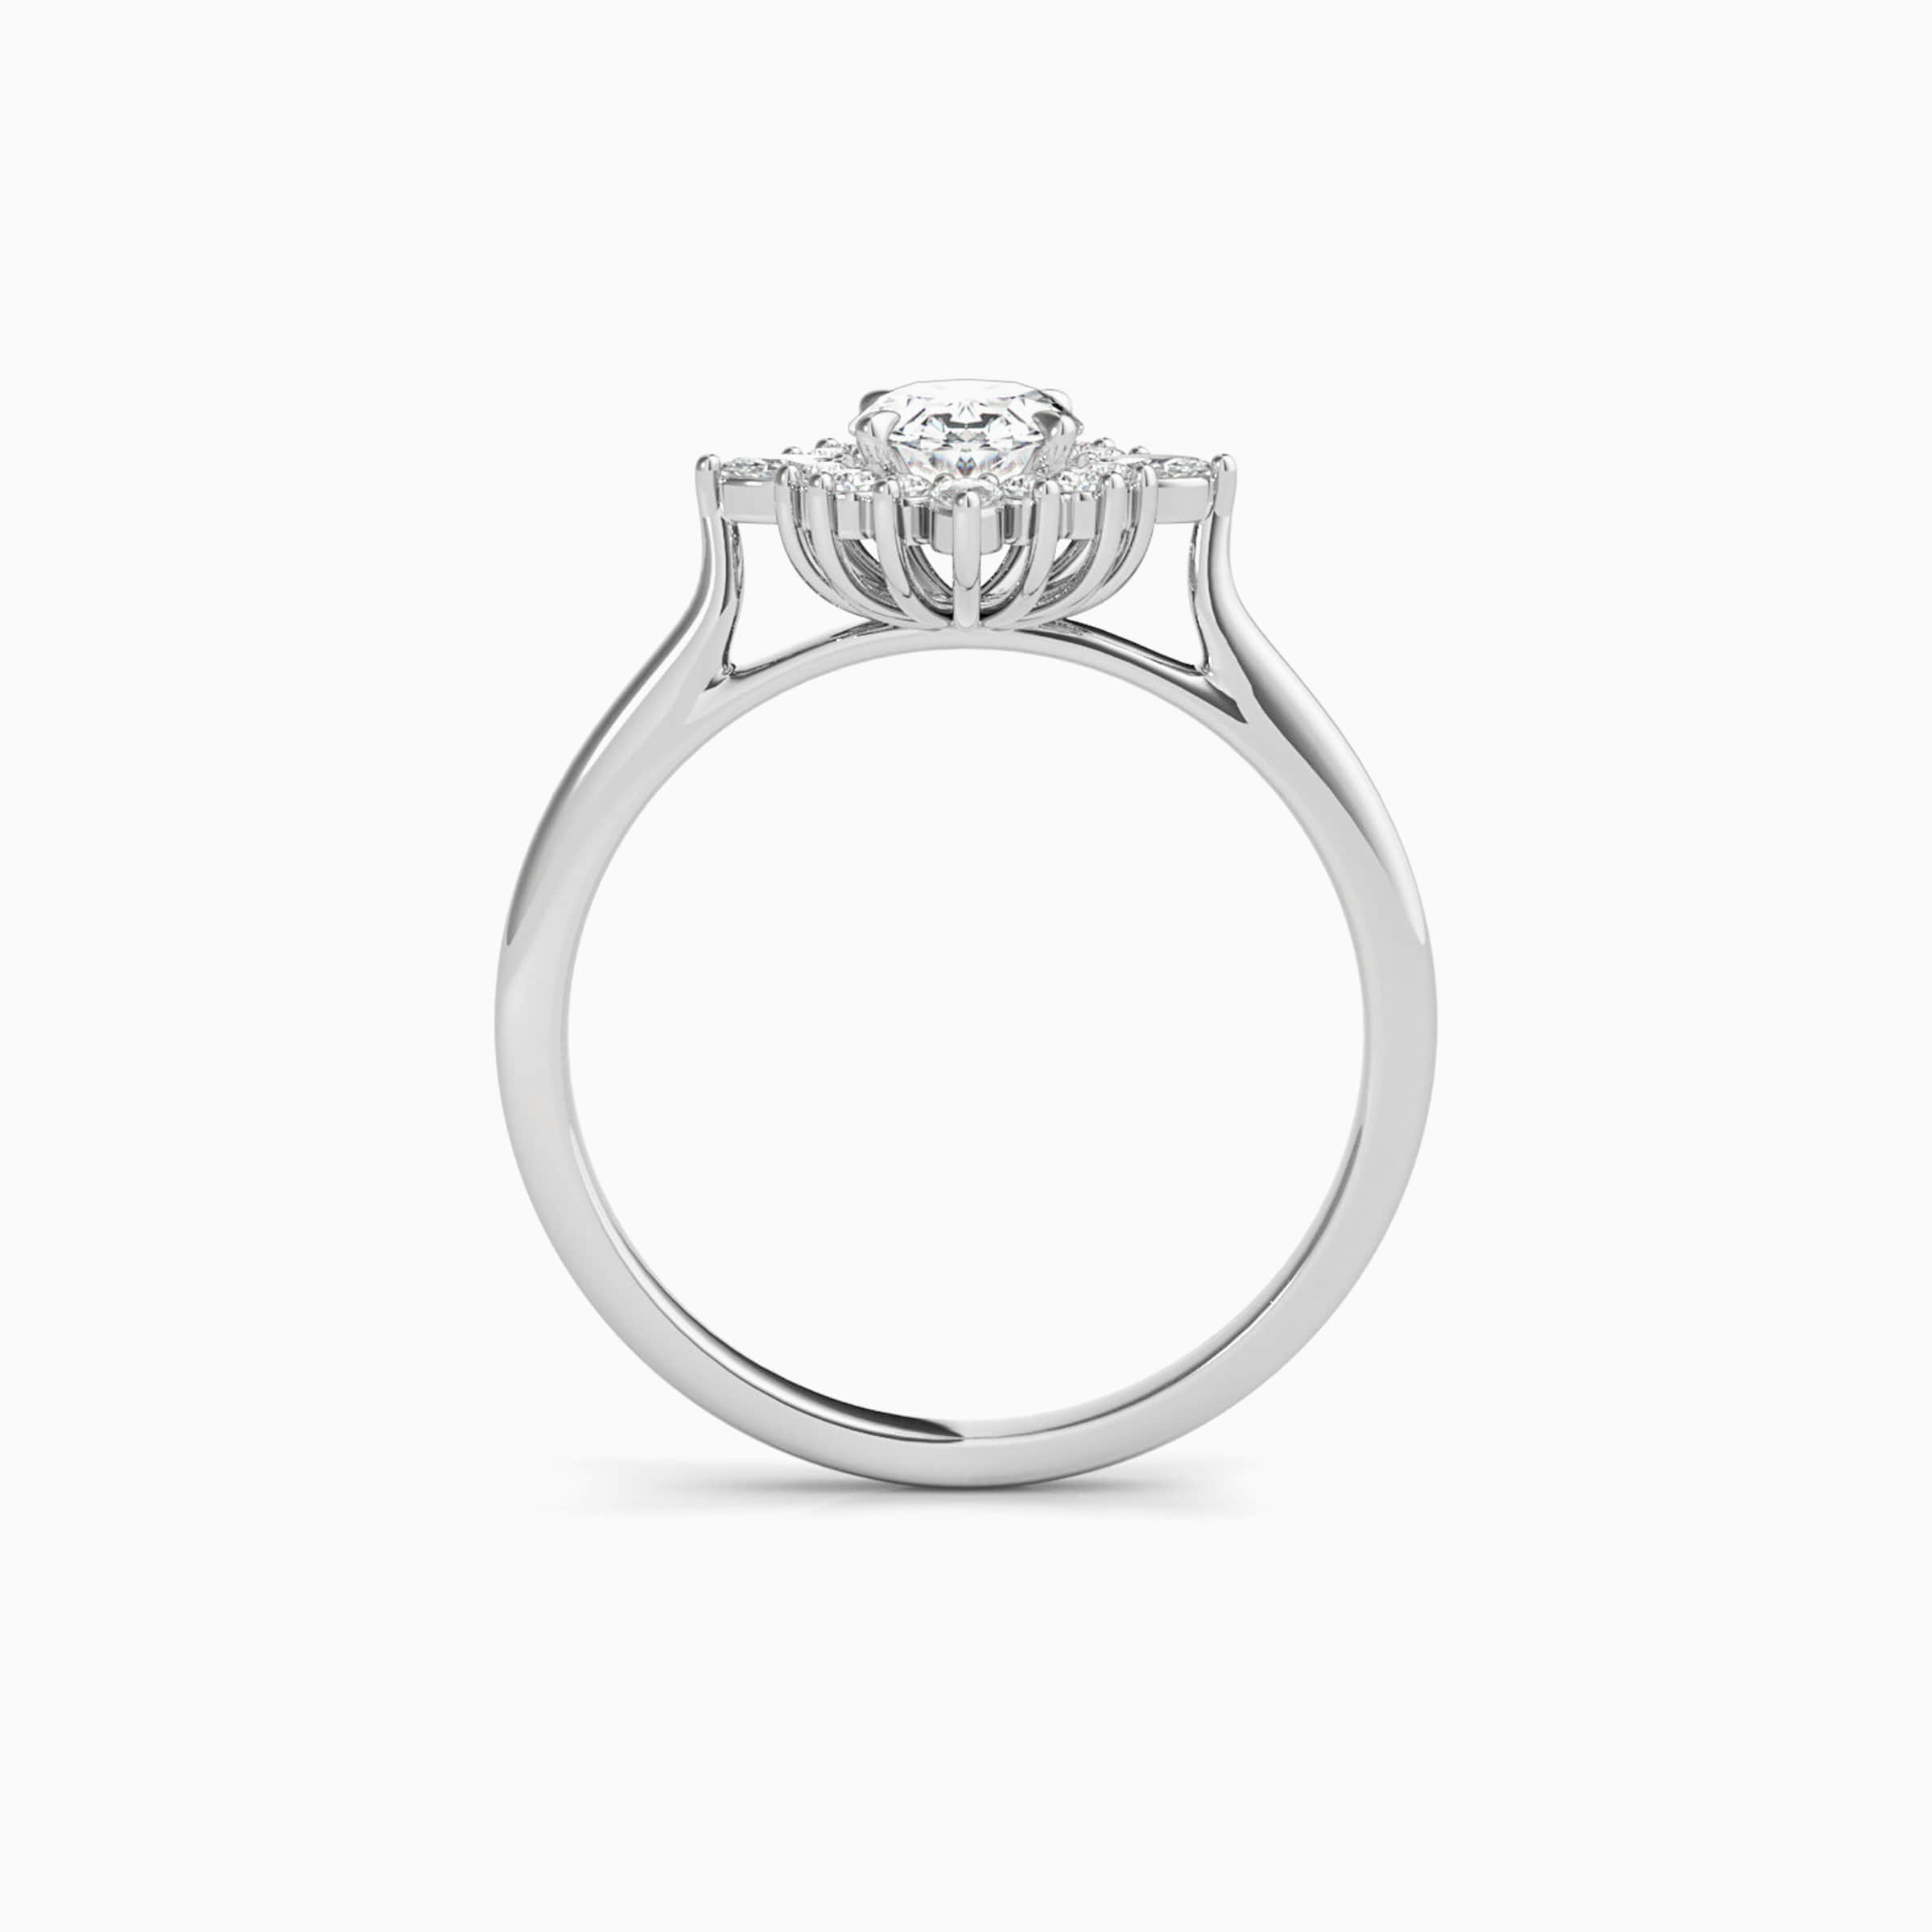 Darry Ring oval cut promise ring front view